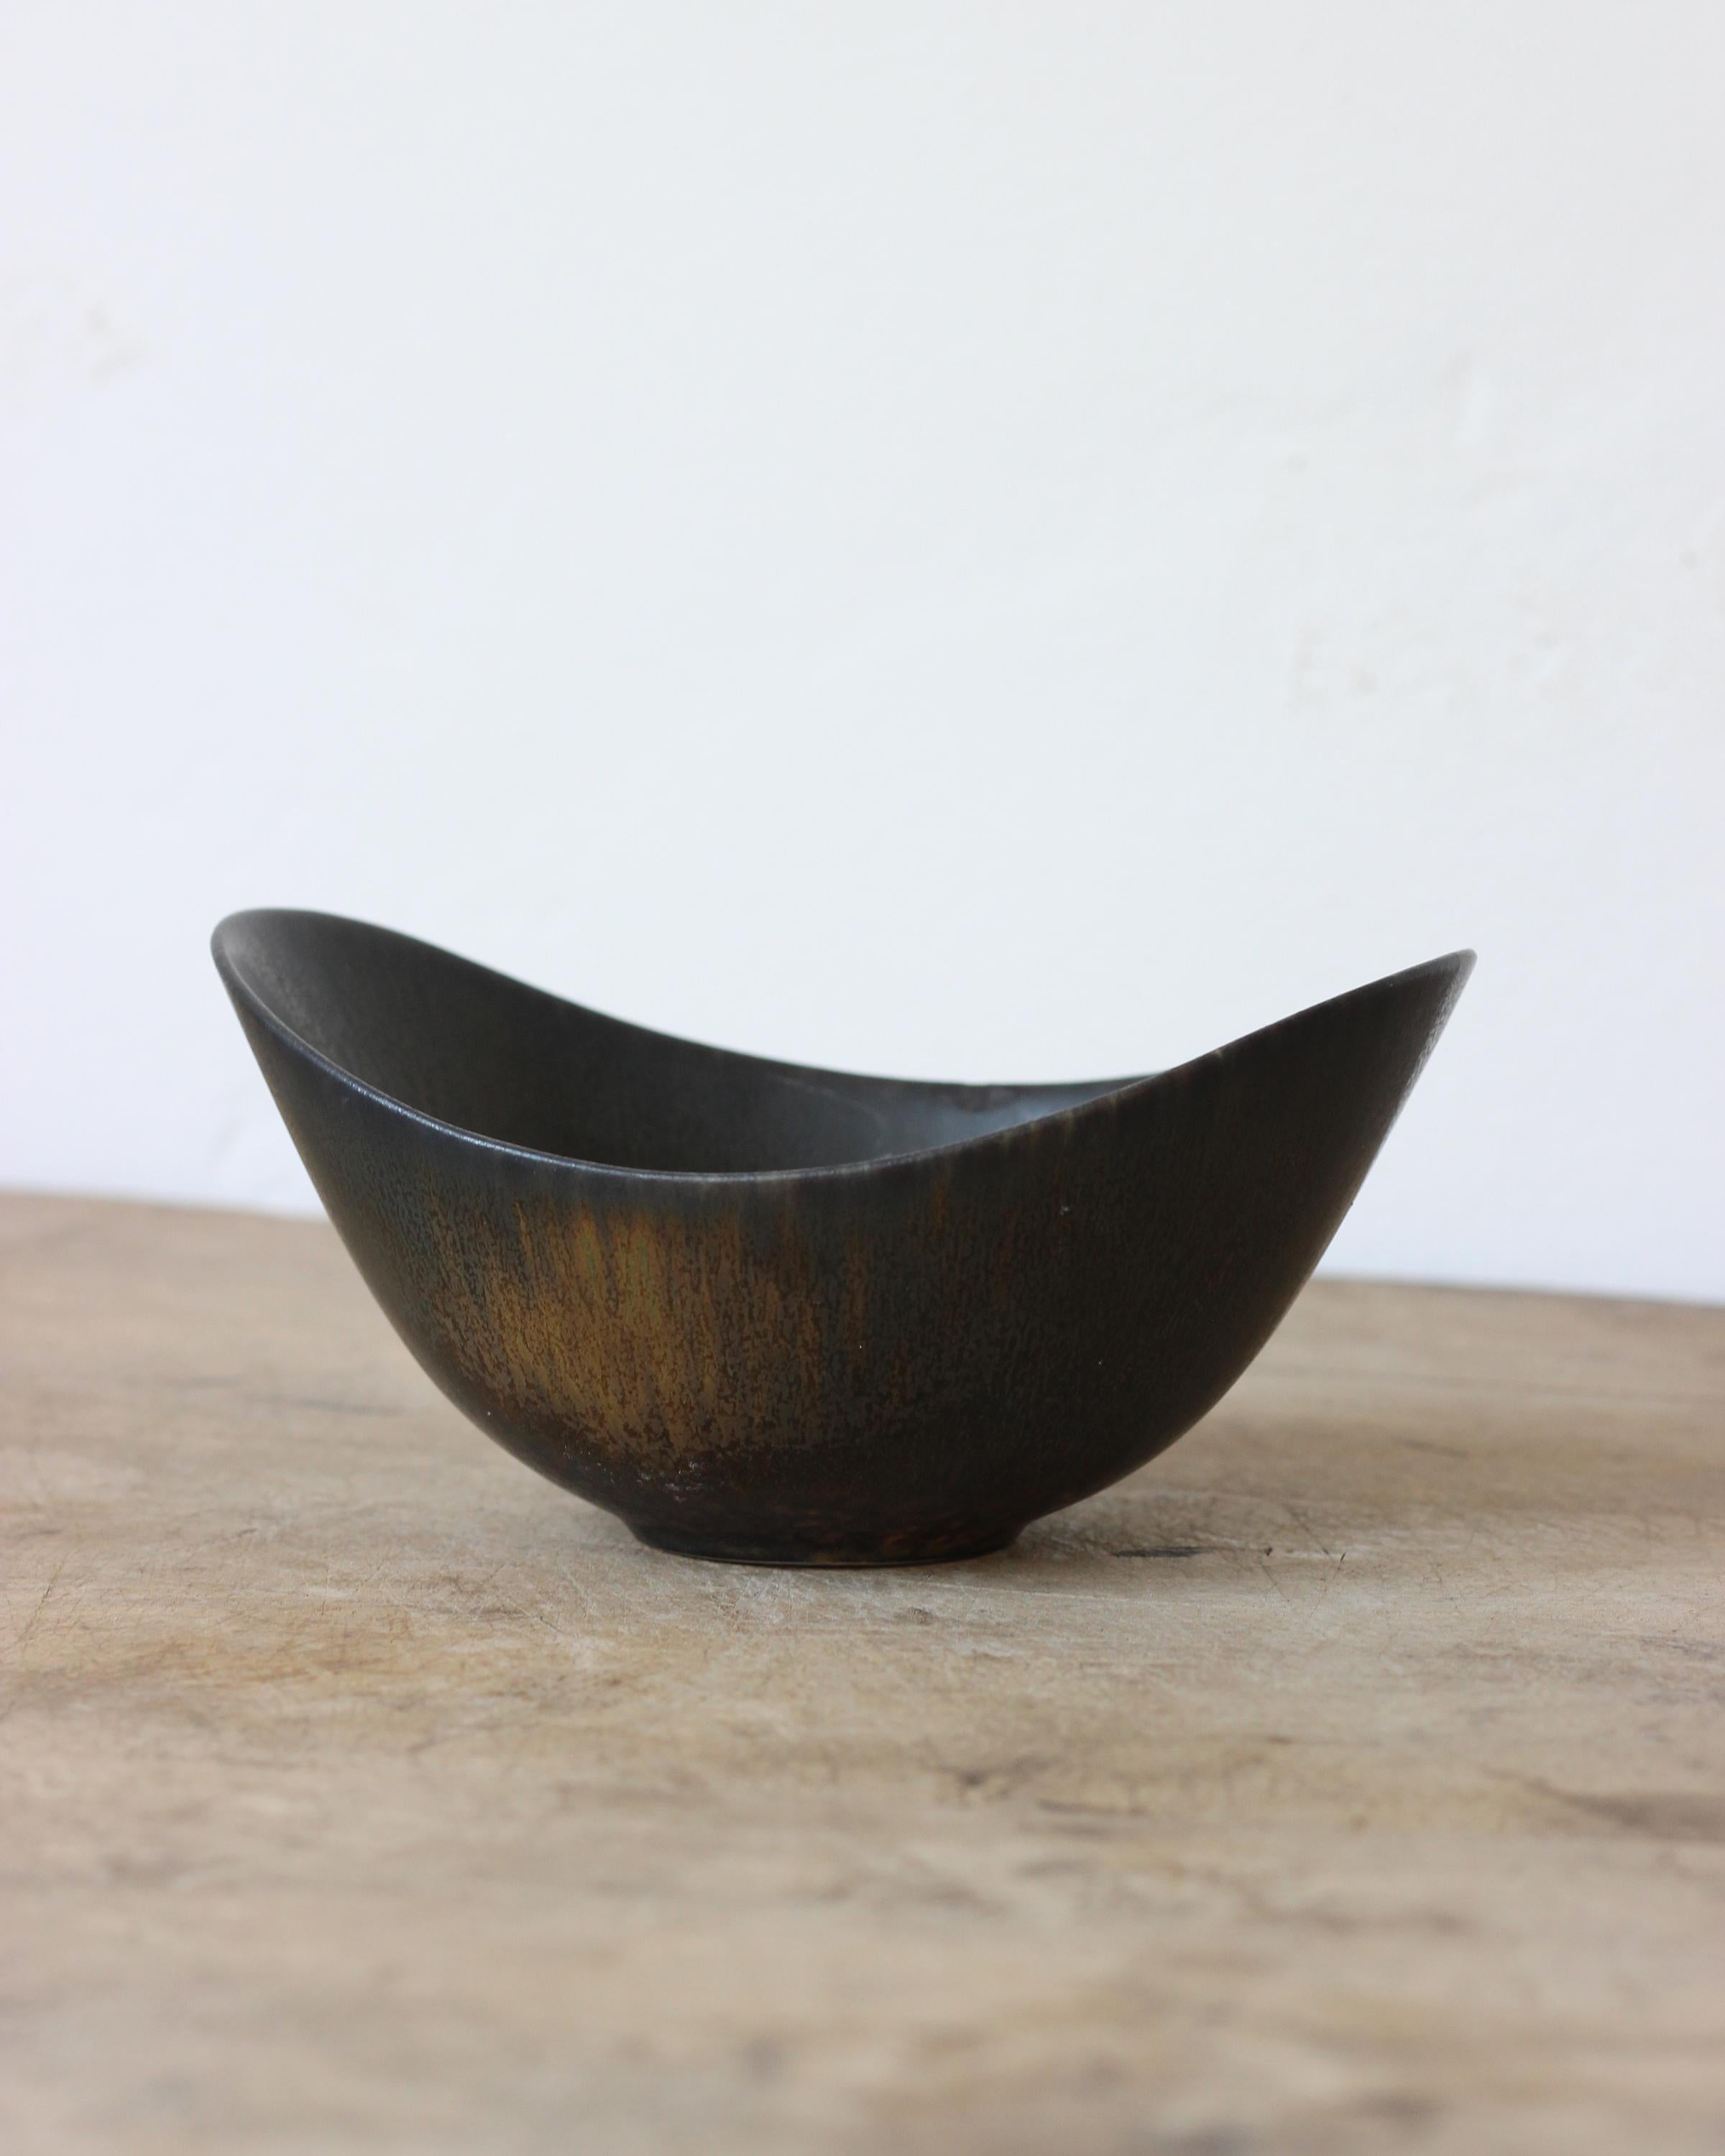 Beautiful and rare bowl by Gunnar Nylund in a dark glaze with hues of black, navy, brown. Rörstrand produced in the 1950s. In good vintage condition showing small signs from age and use. Signed on bottom.